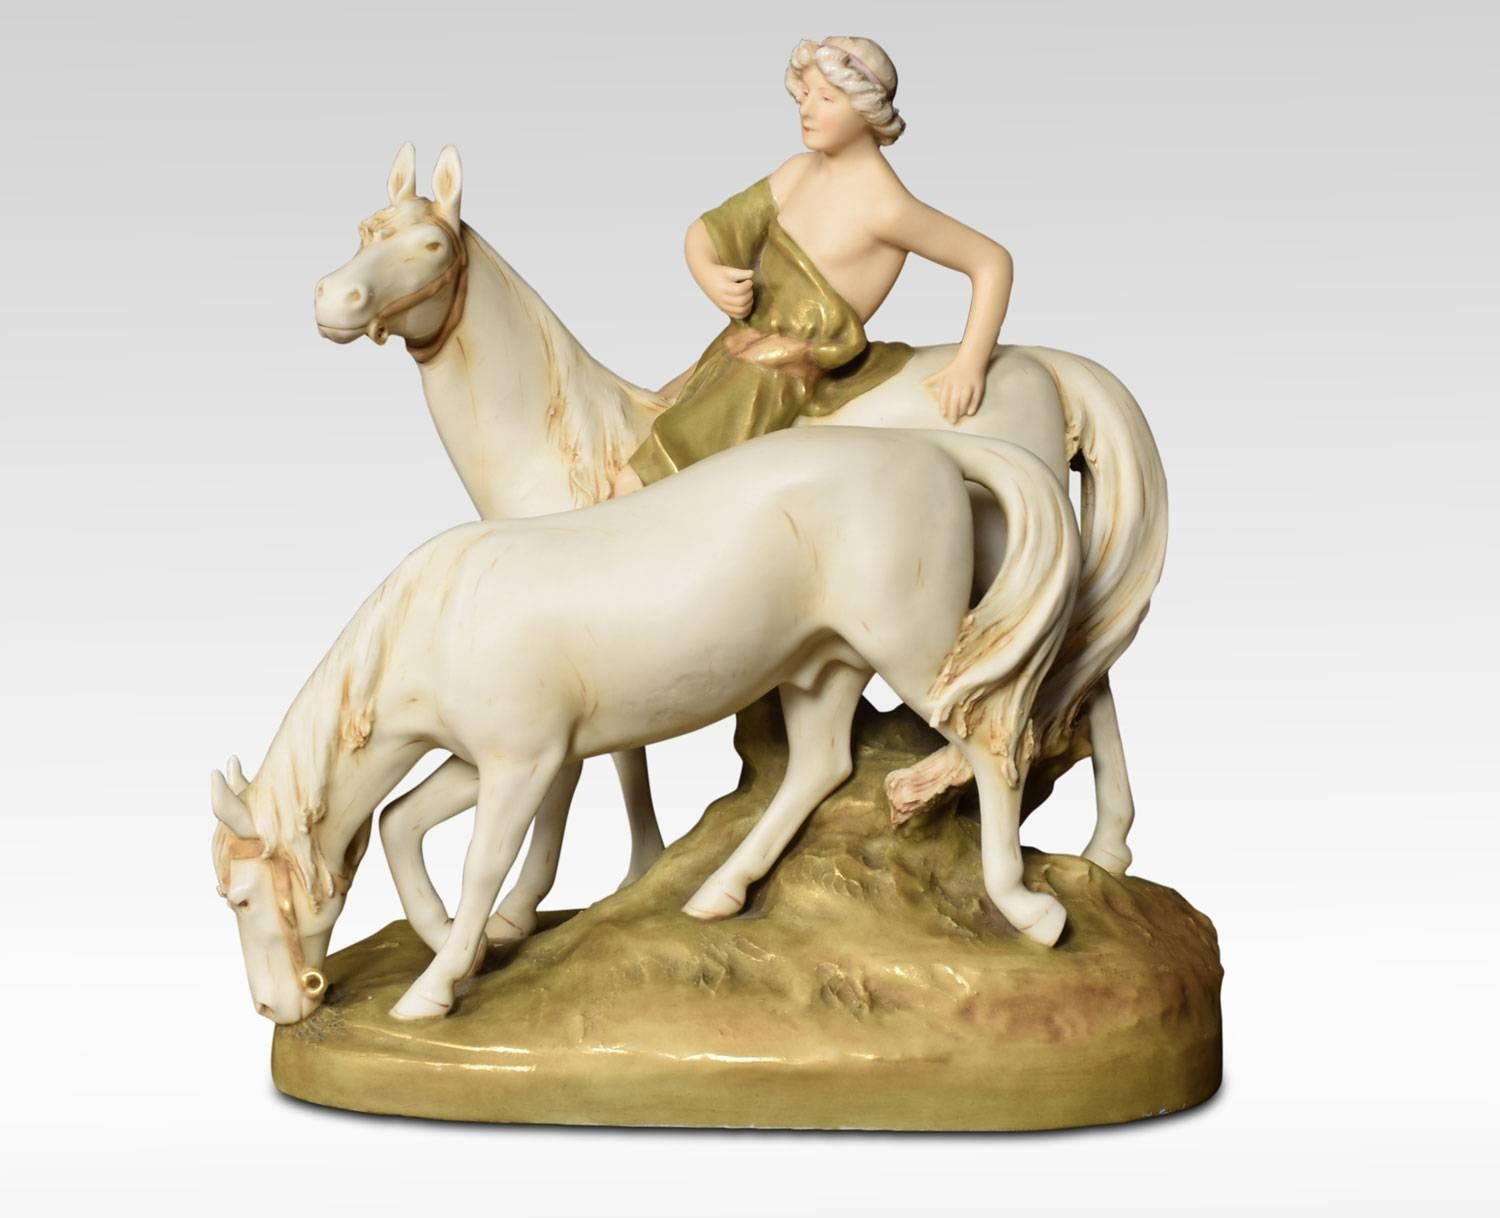 Royal Dux porcelain figure group, early 20th century, of a youth in loose green drapery mounted on a horse, another horse alongside. Impressed and printed marks and numbers underside together with the applied pink triangle mark.
Dimensions
Height